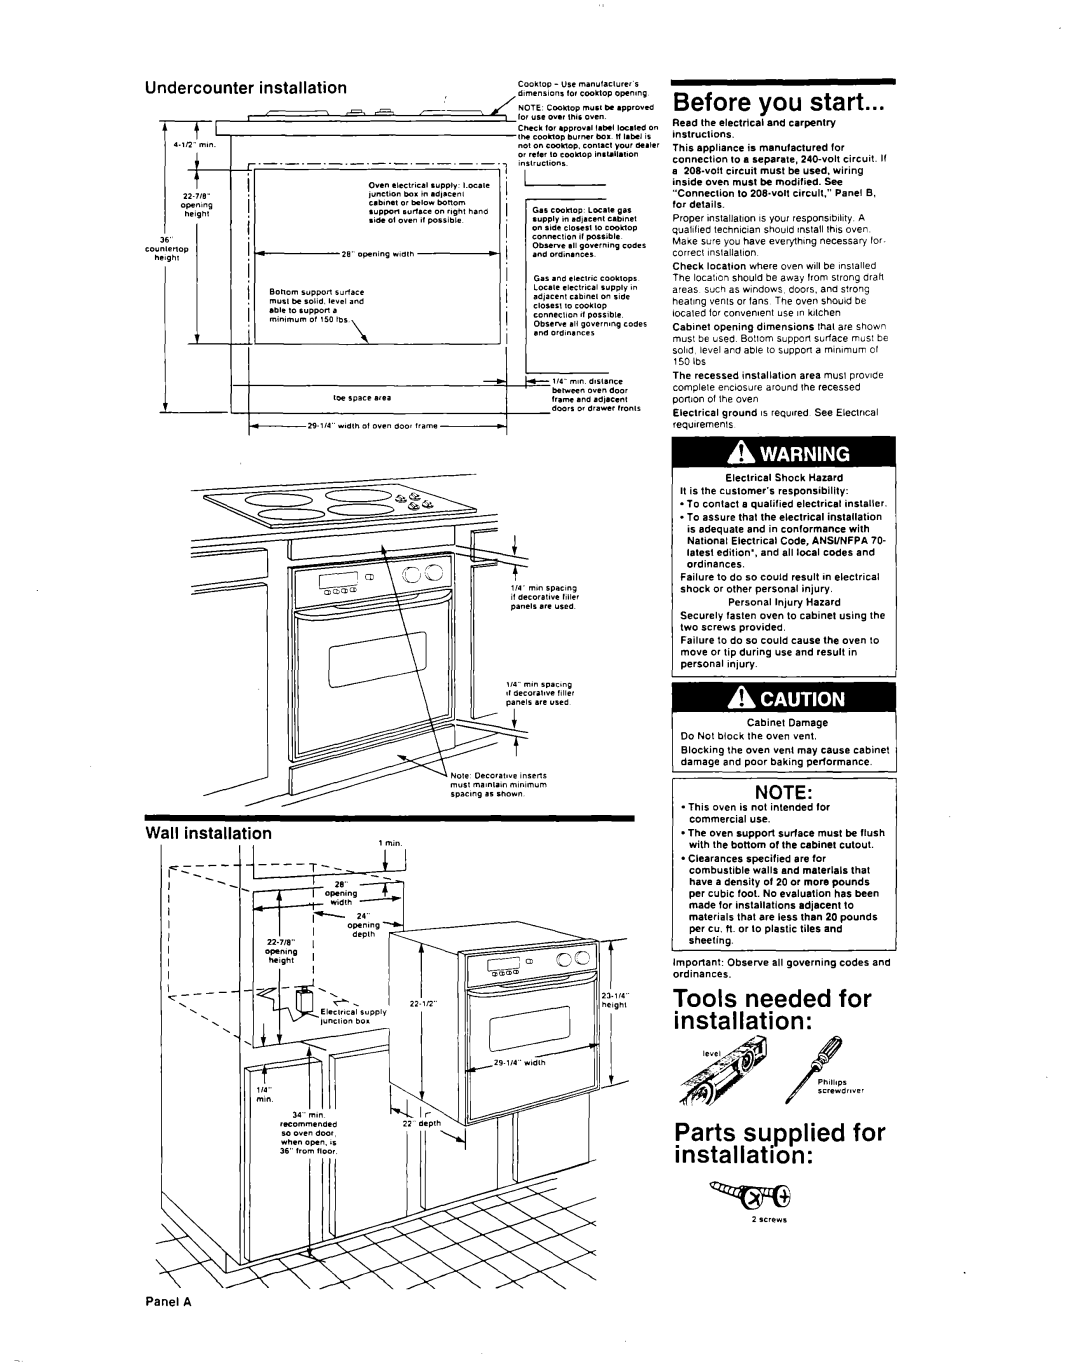 KitchenAid 4367501 A 7-f-l ’, Tools needed for installation ?arts supplied for nstallation, Undercounter installation 